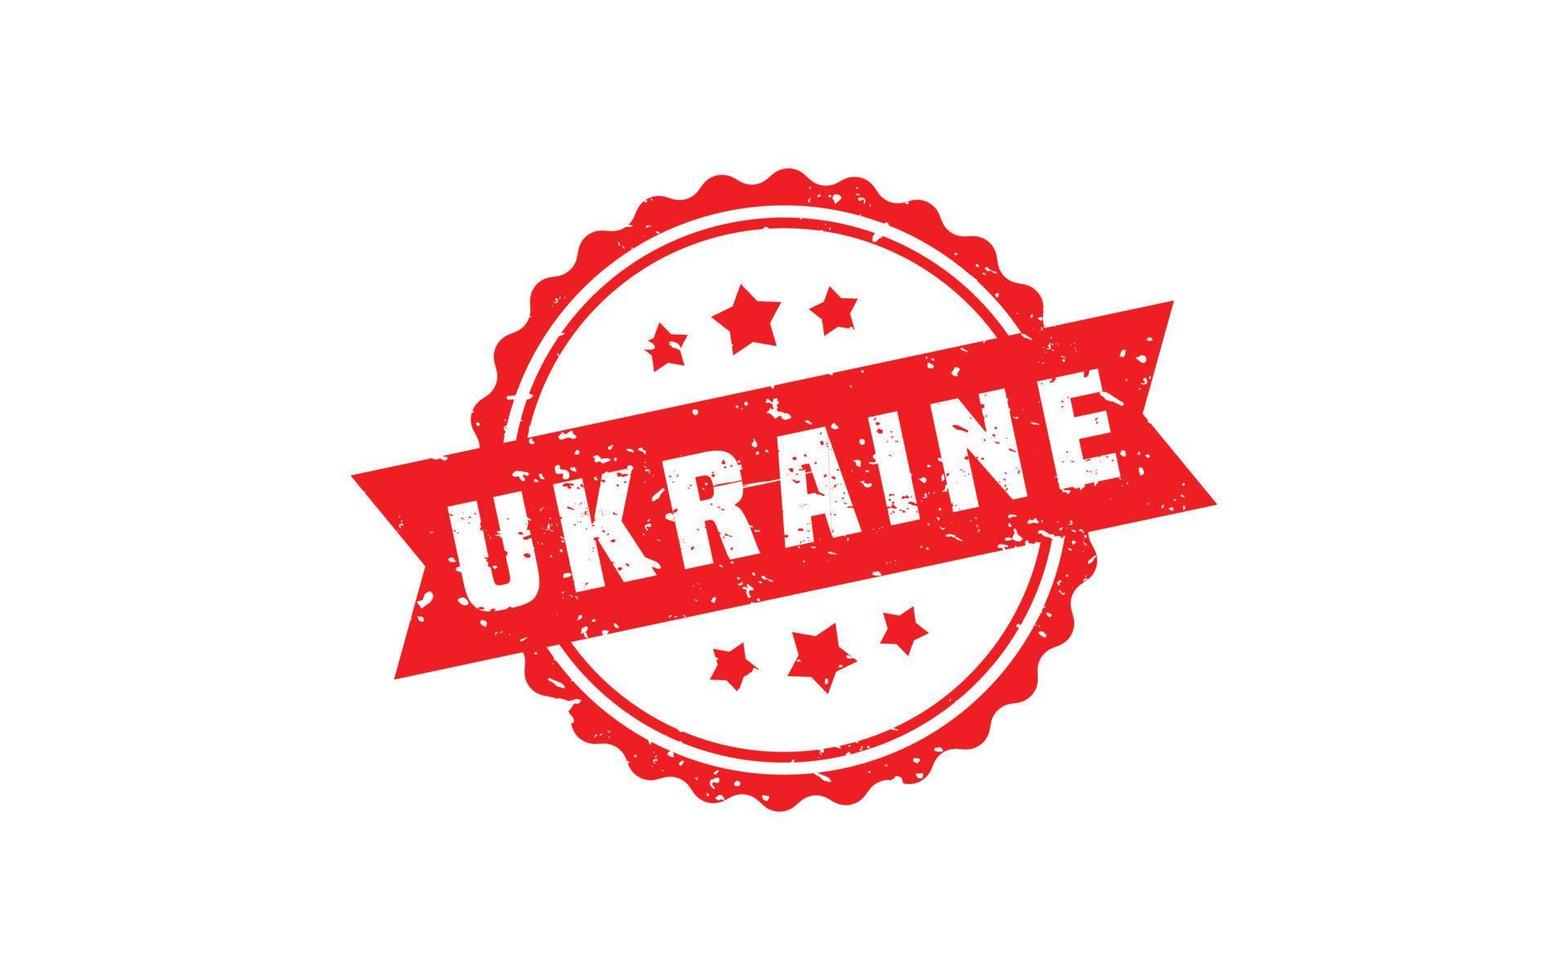 UKRAINE rubber stamp with grunge style on white background vector